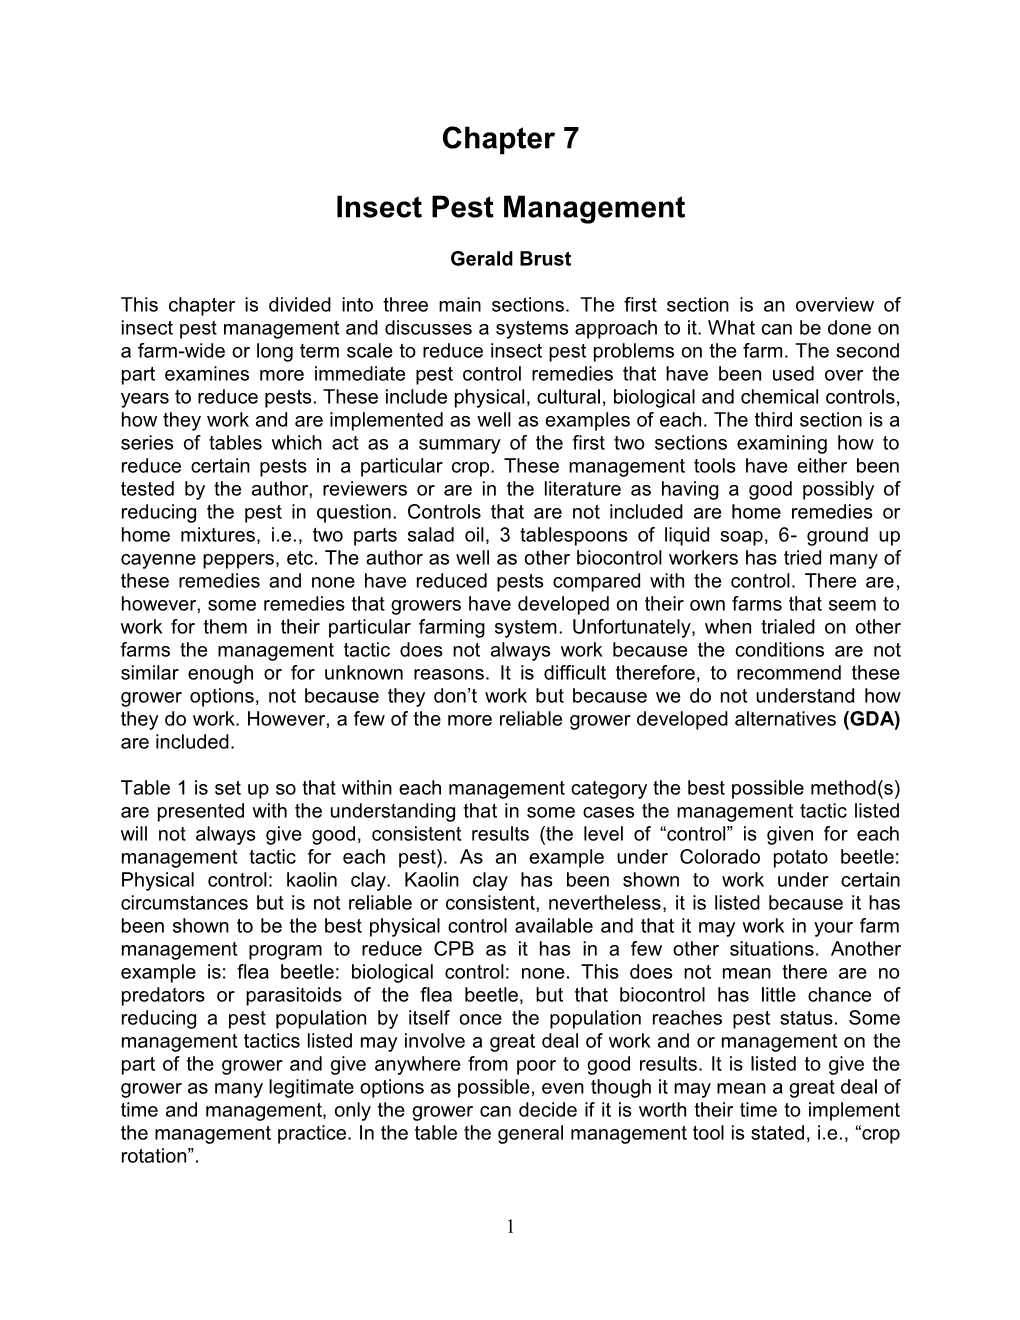 Chapter 7 Insect Pest Management